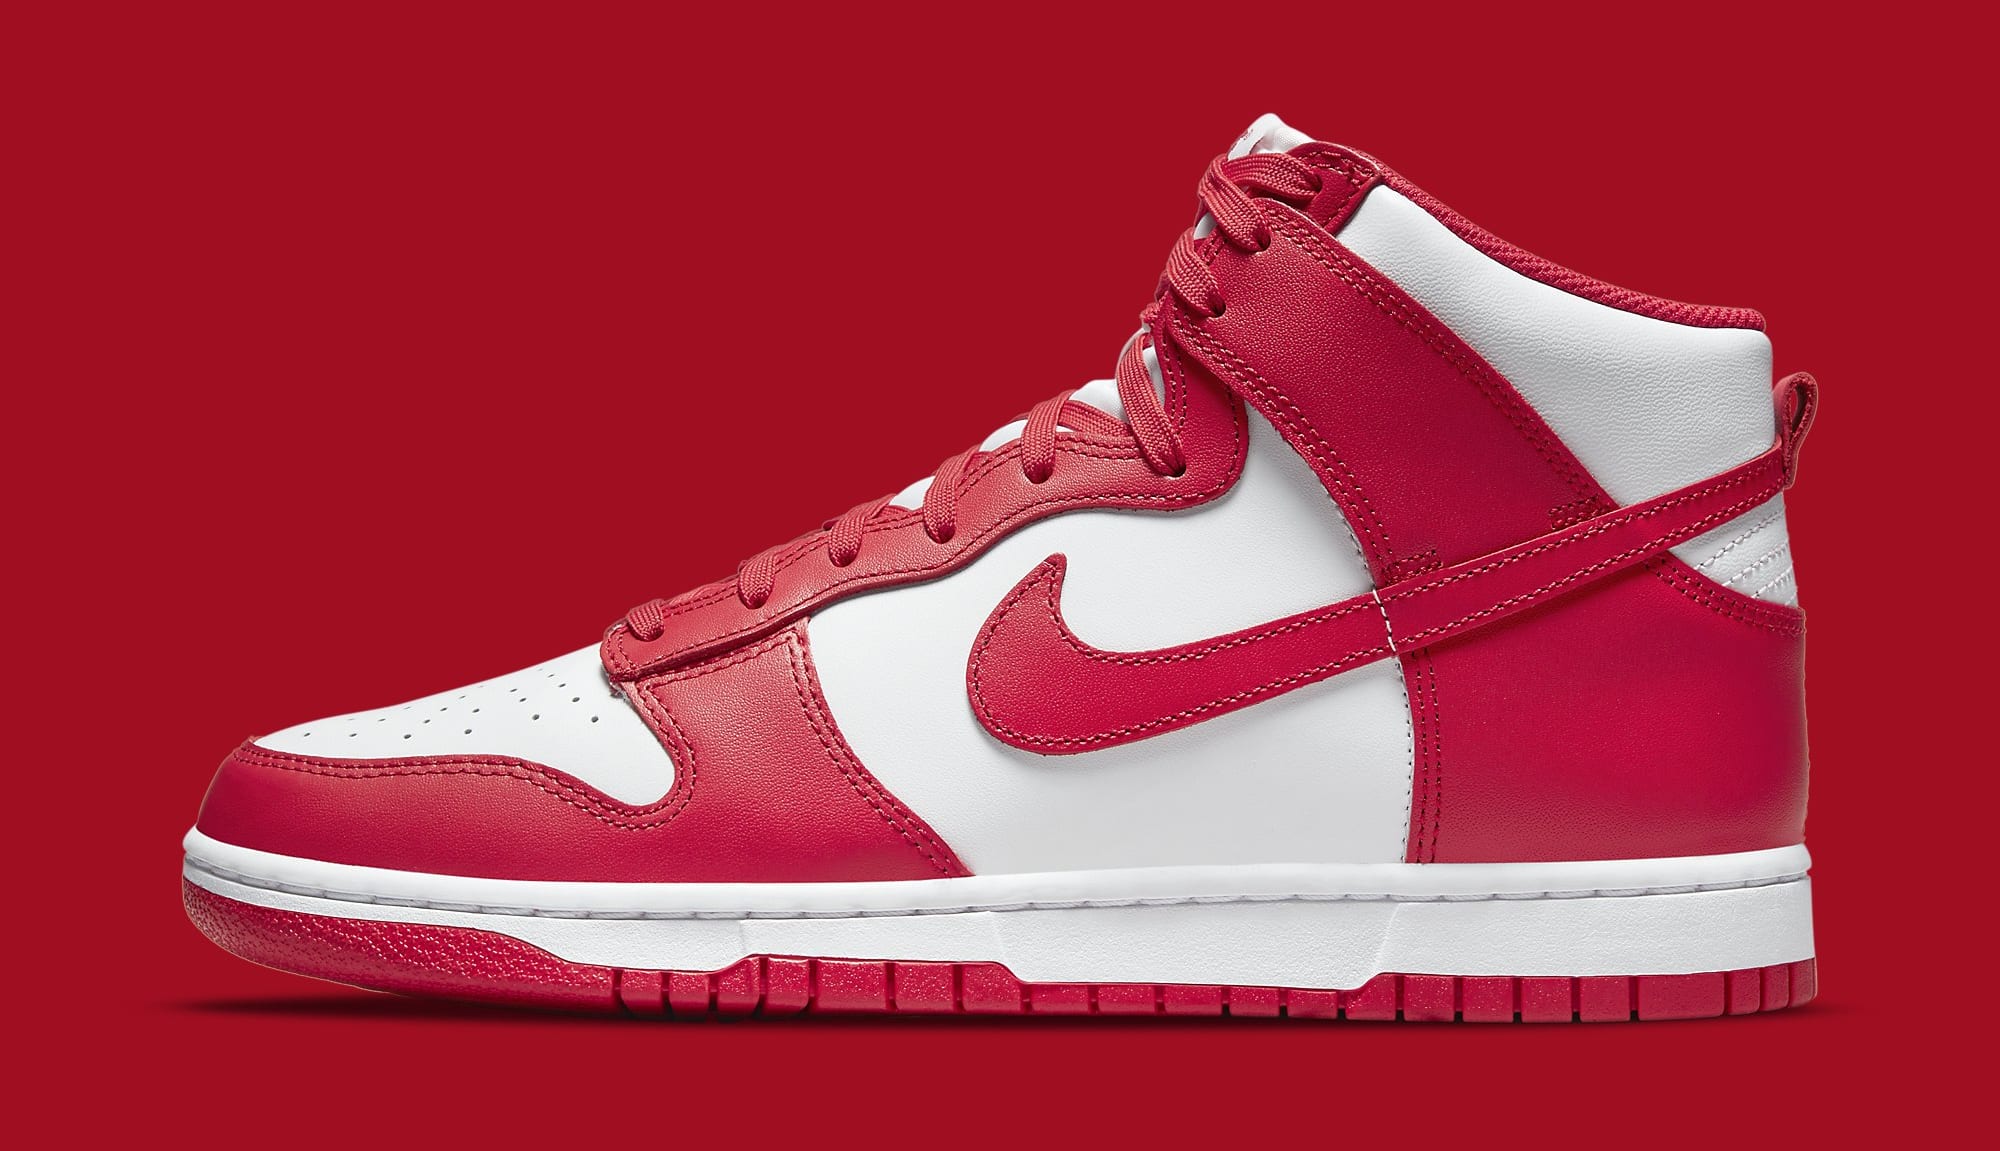 Nike Dunk High 'University Red' DD1399 106 Lateral